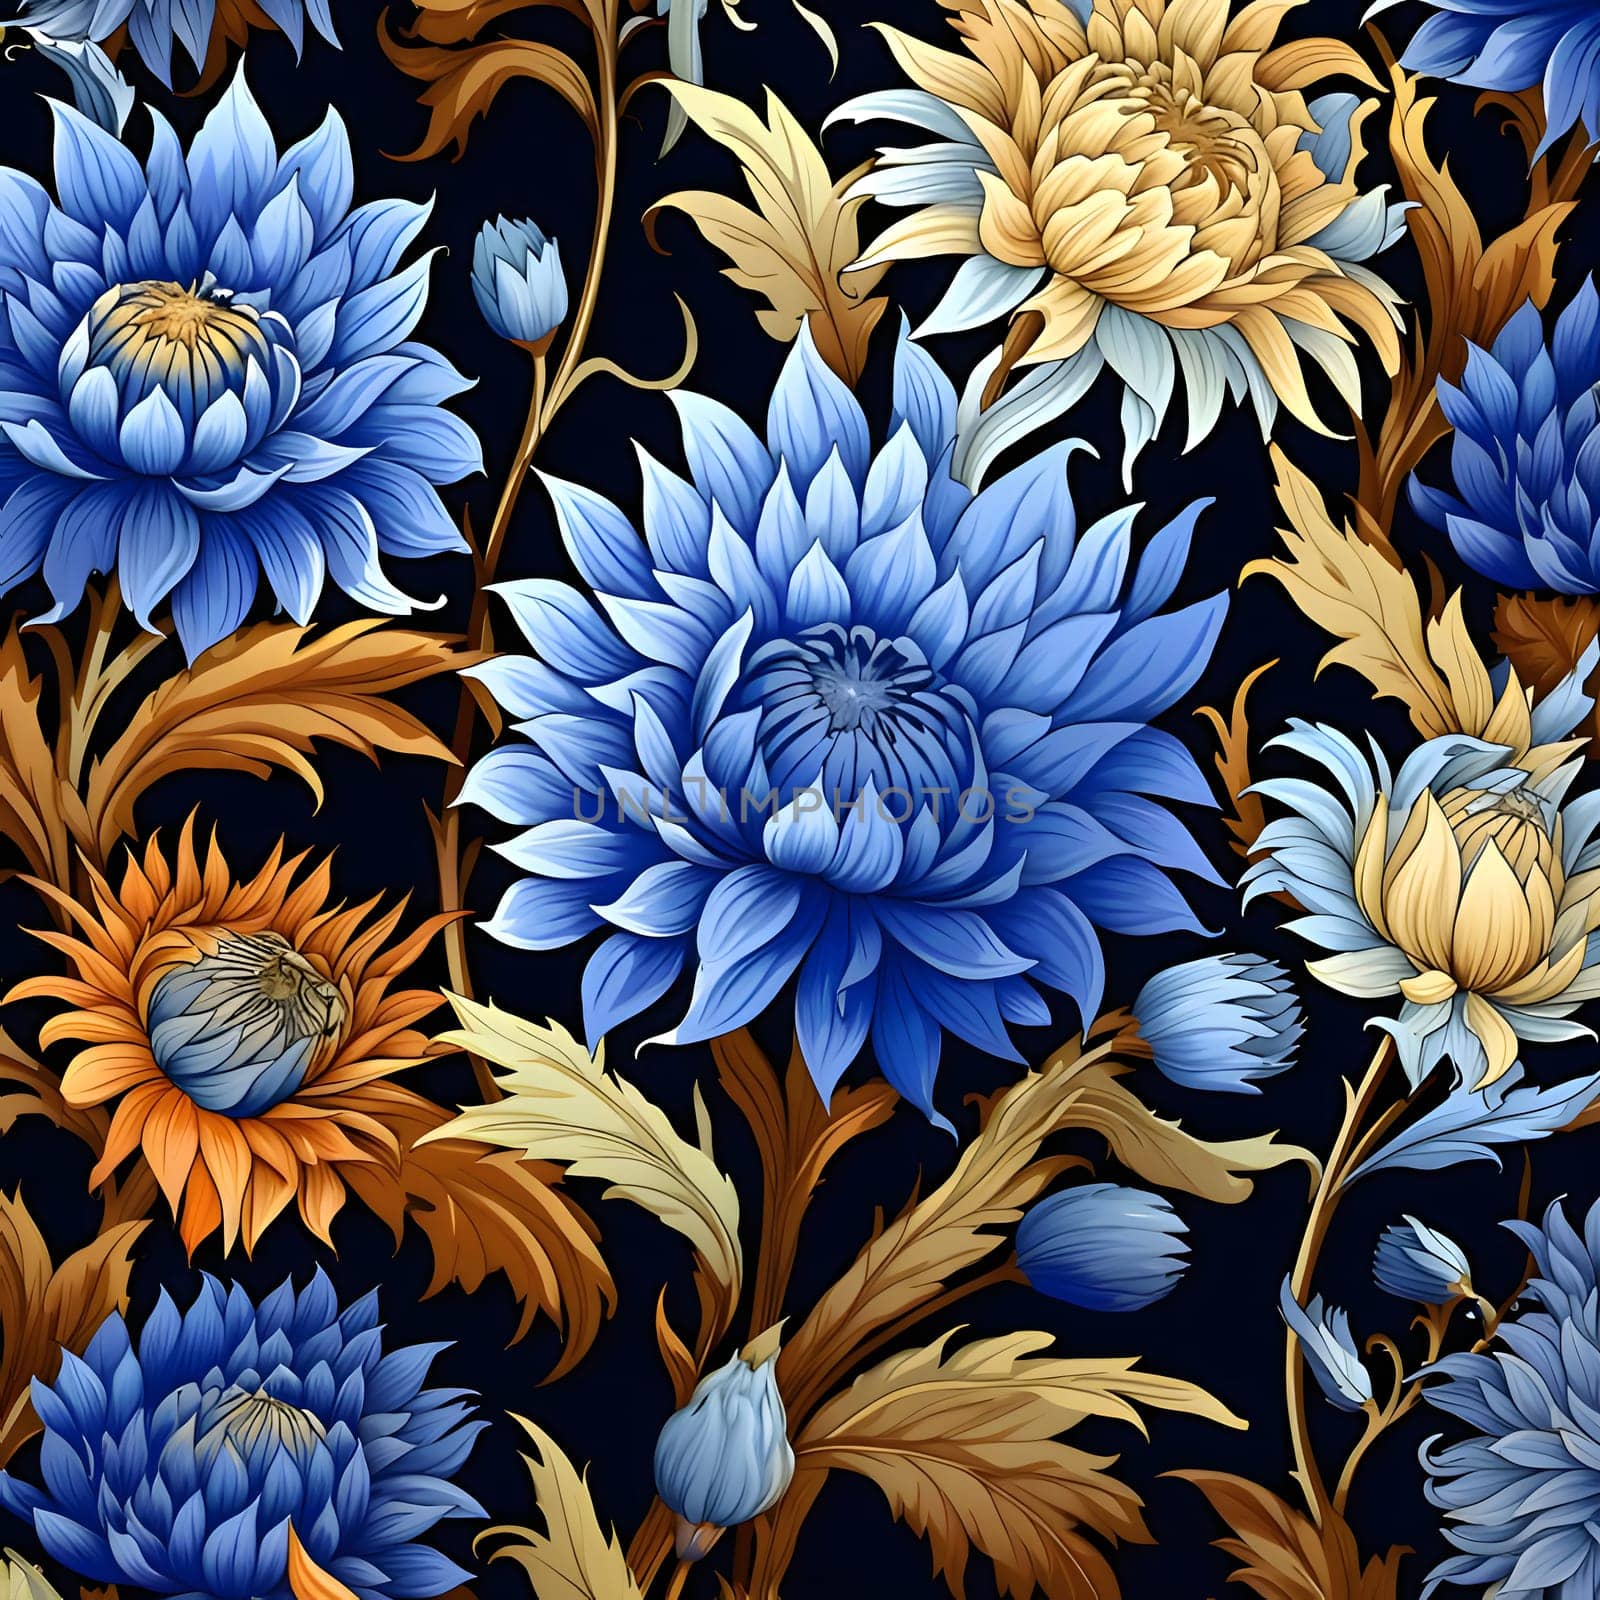 Patterns and banners backgrounds: Seamless pattern with blue dahlias on a dark blue background.